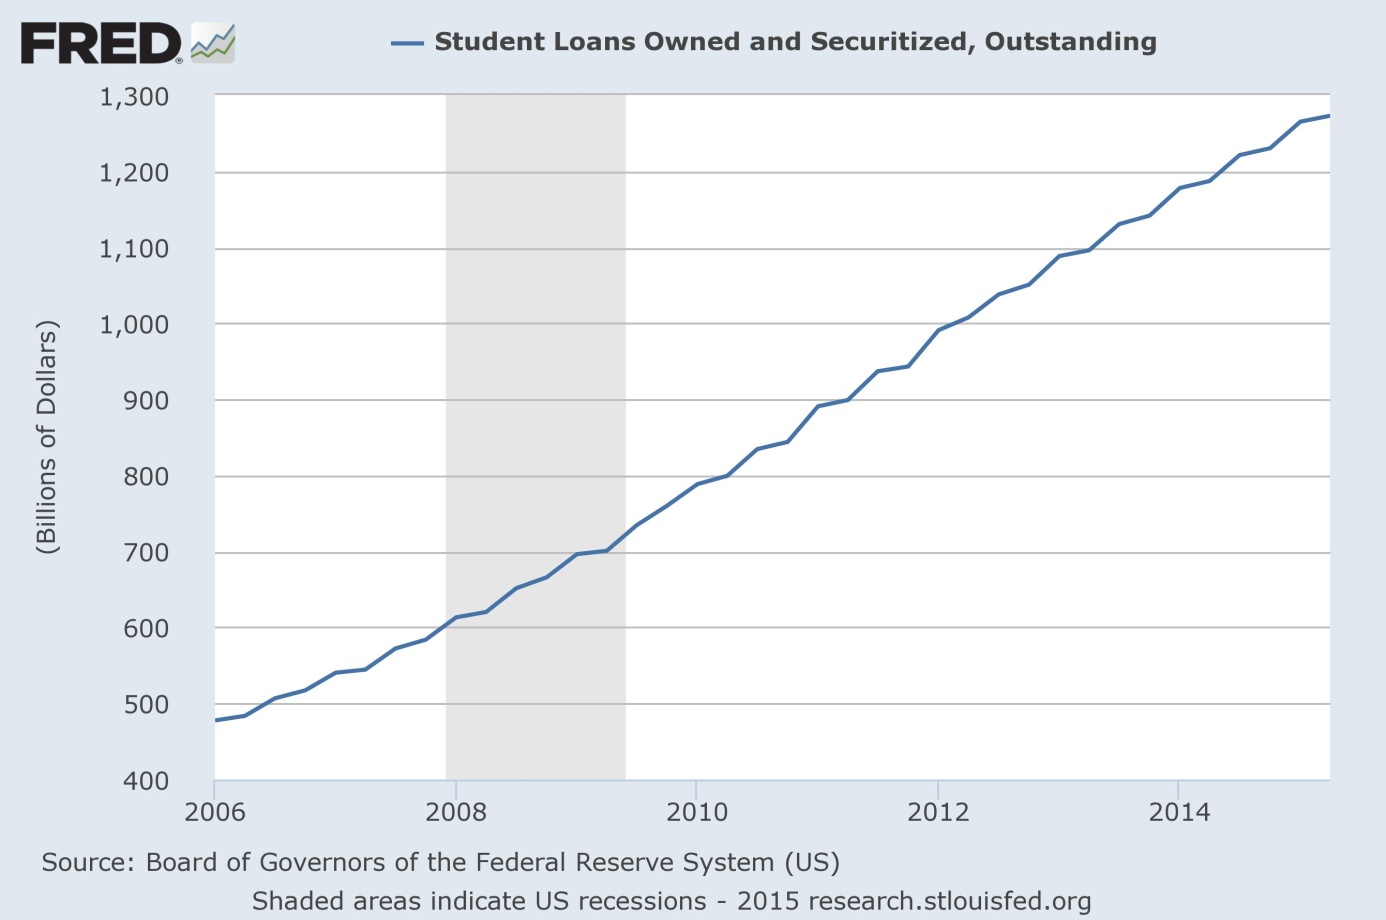 Student loans owned and securitized, outstanding in billions of U.S. dollars, 2006-2014